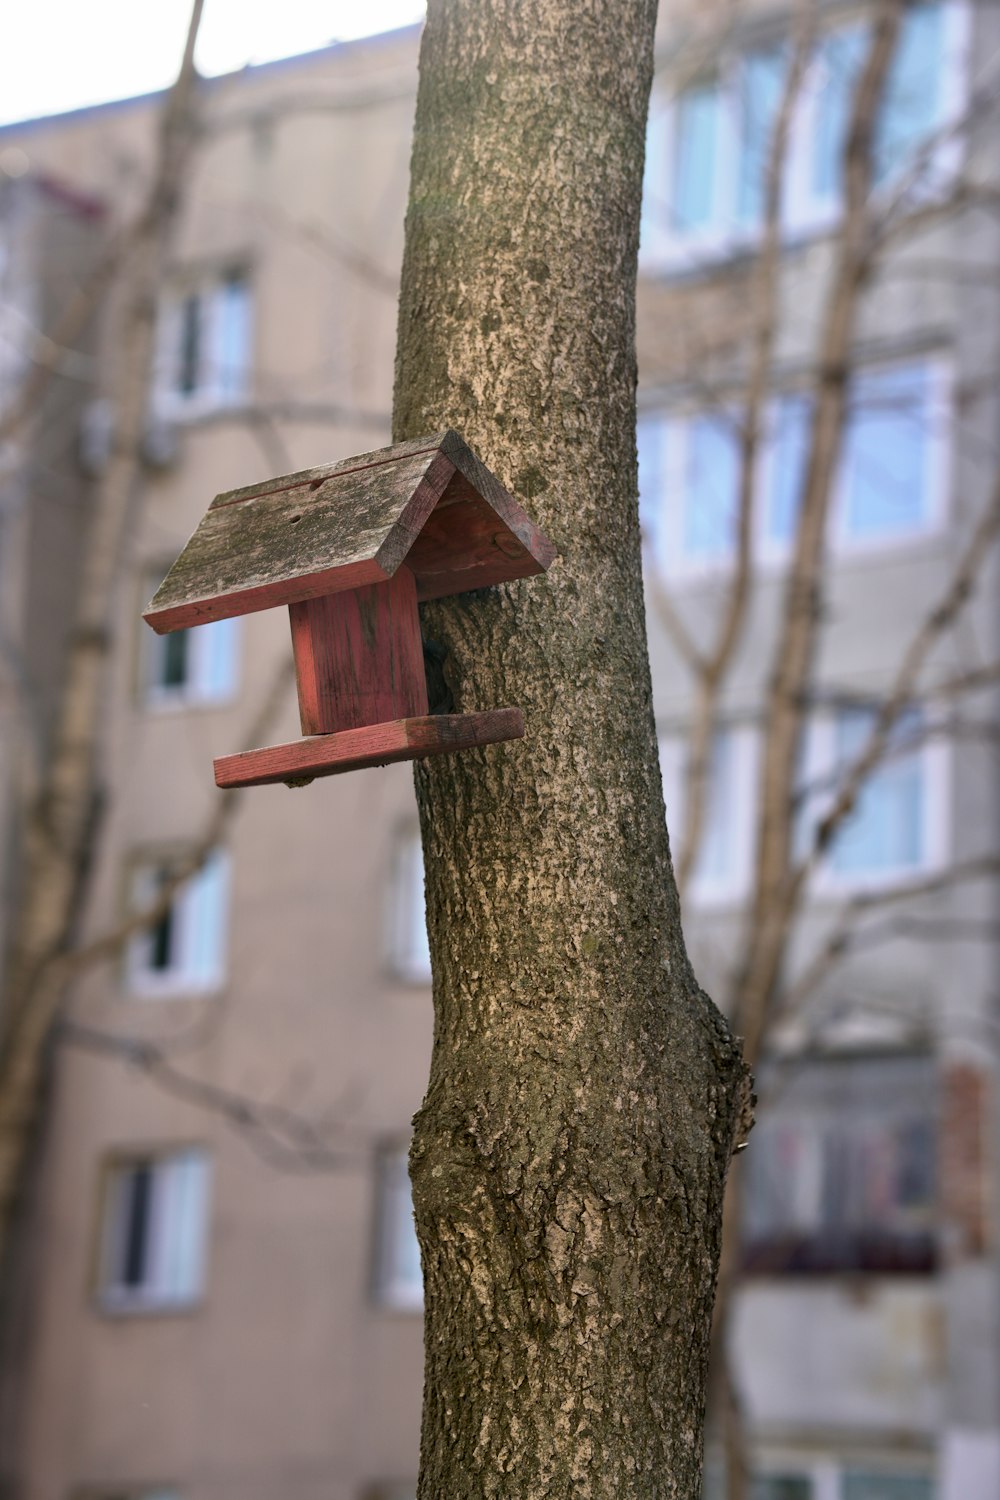 a bird house on a tree in front of a building